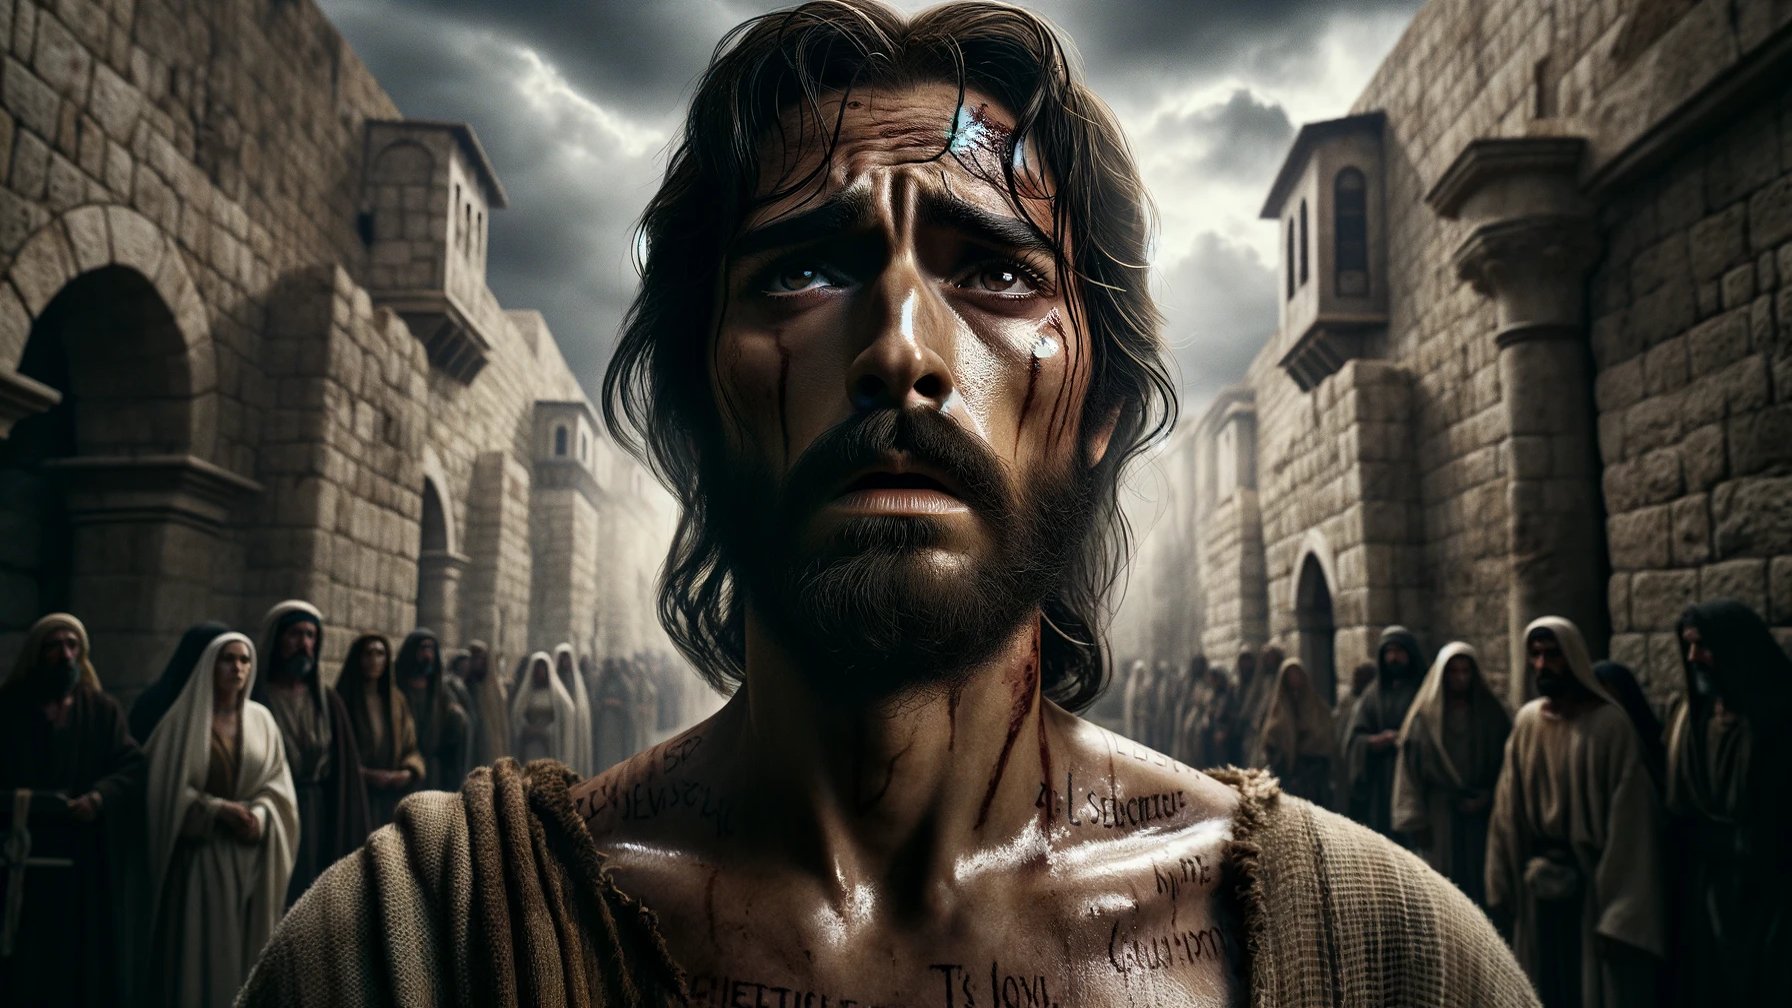 Who Played Jesus In “The Passion Of The Christ”